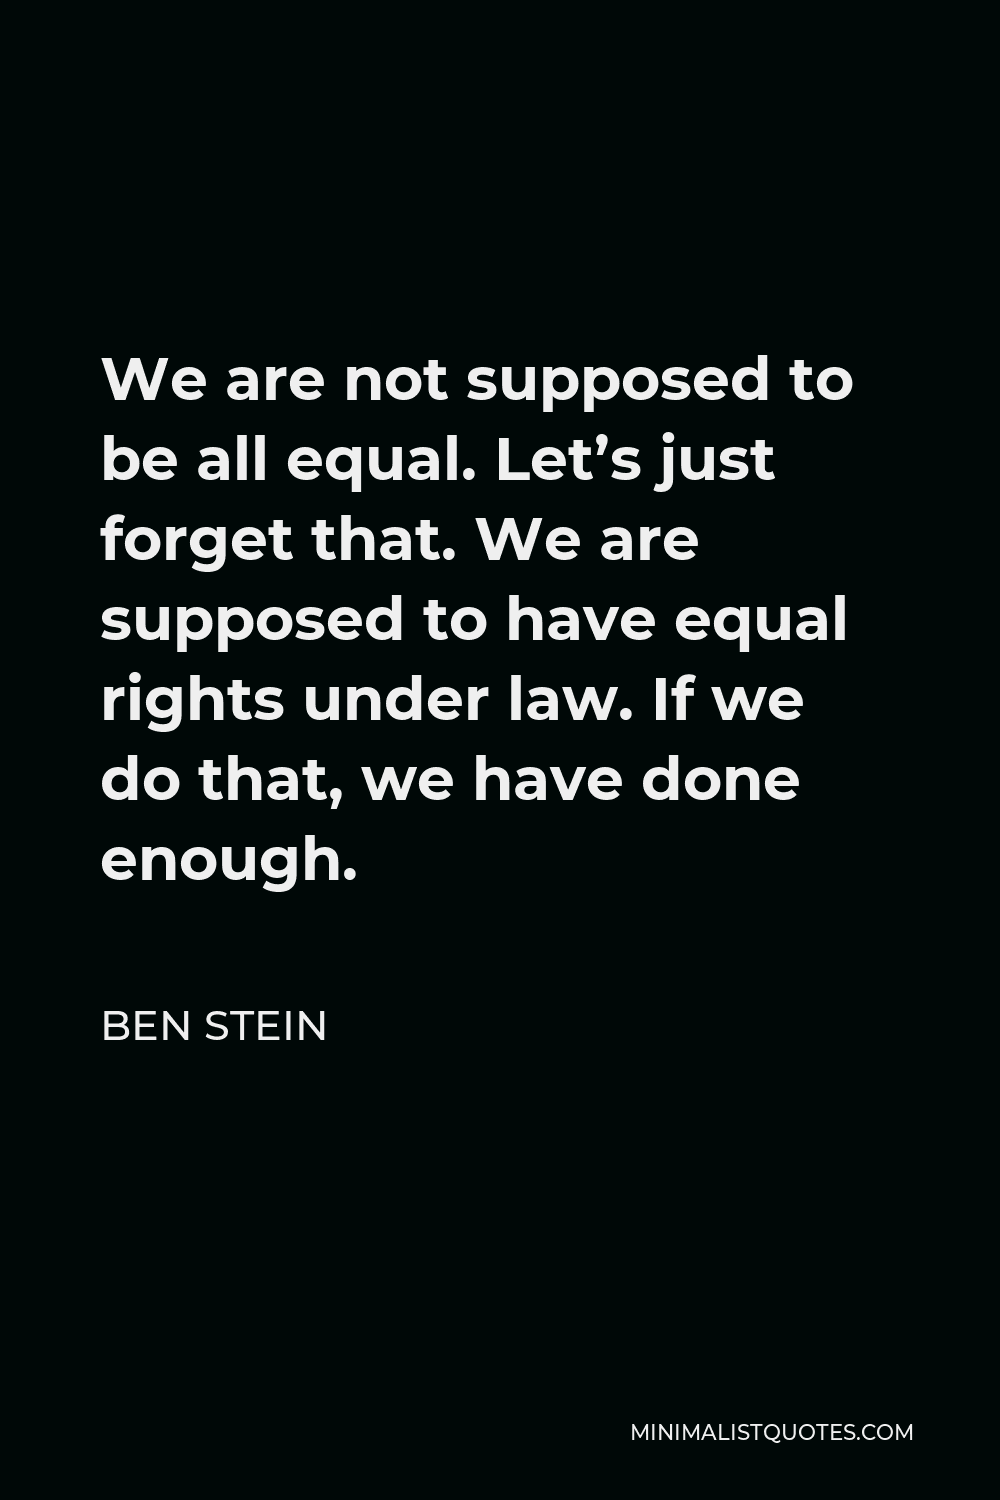 Ben Stein Quote - We are not supposed to be all equal. Let’s just forget that. We are supposed to have equal rights under law. If we do that, we have done enough.